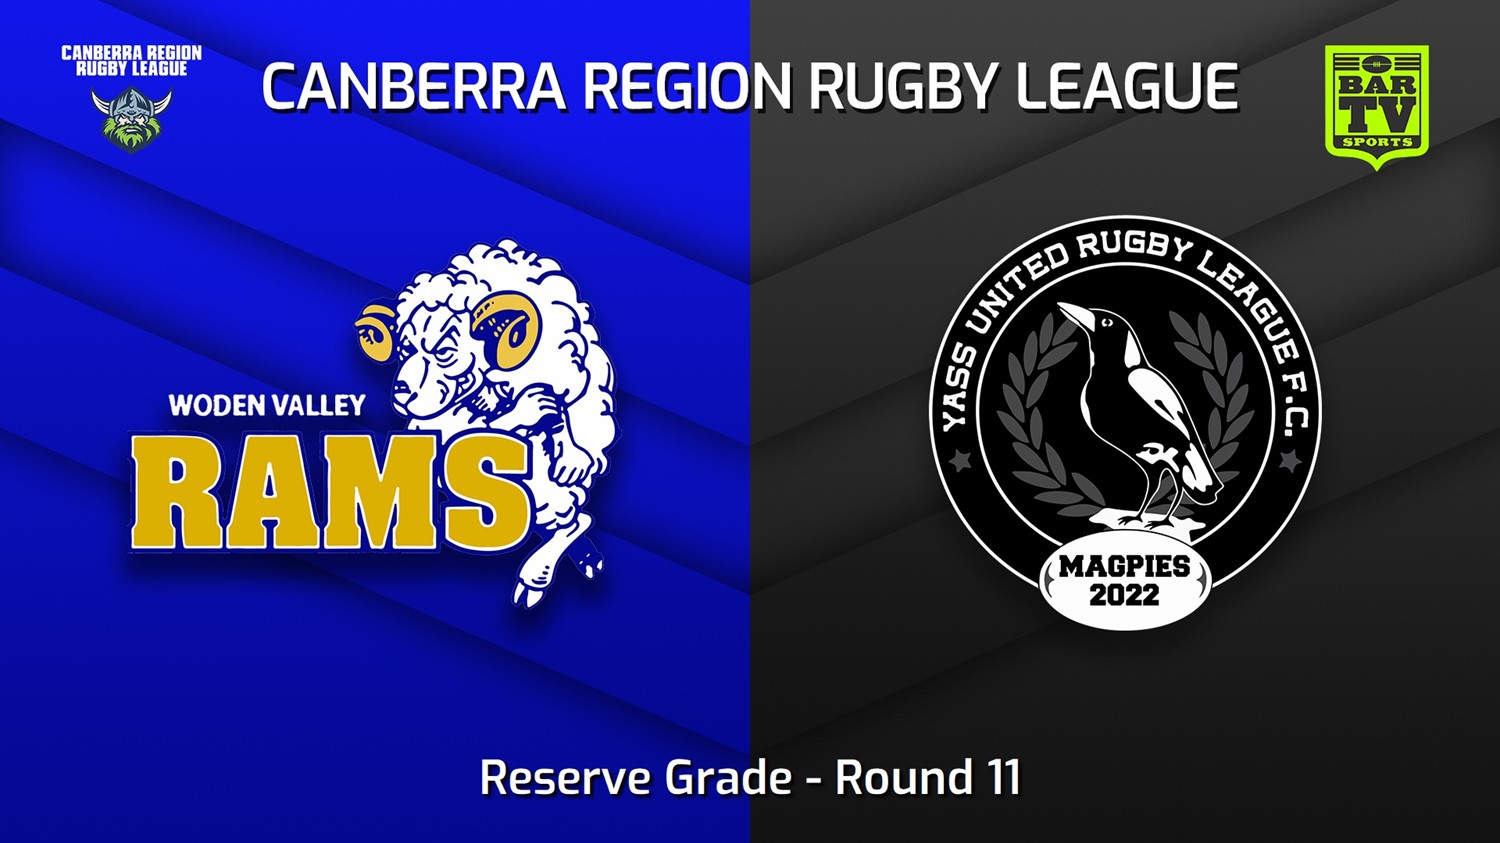 220702-Canberra Round 11 - Reserve Grade - Woden Valley Rams v Yass Magpies Slate Image